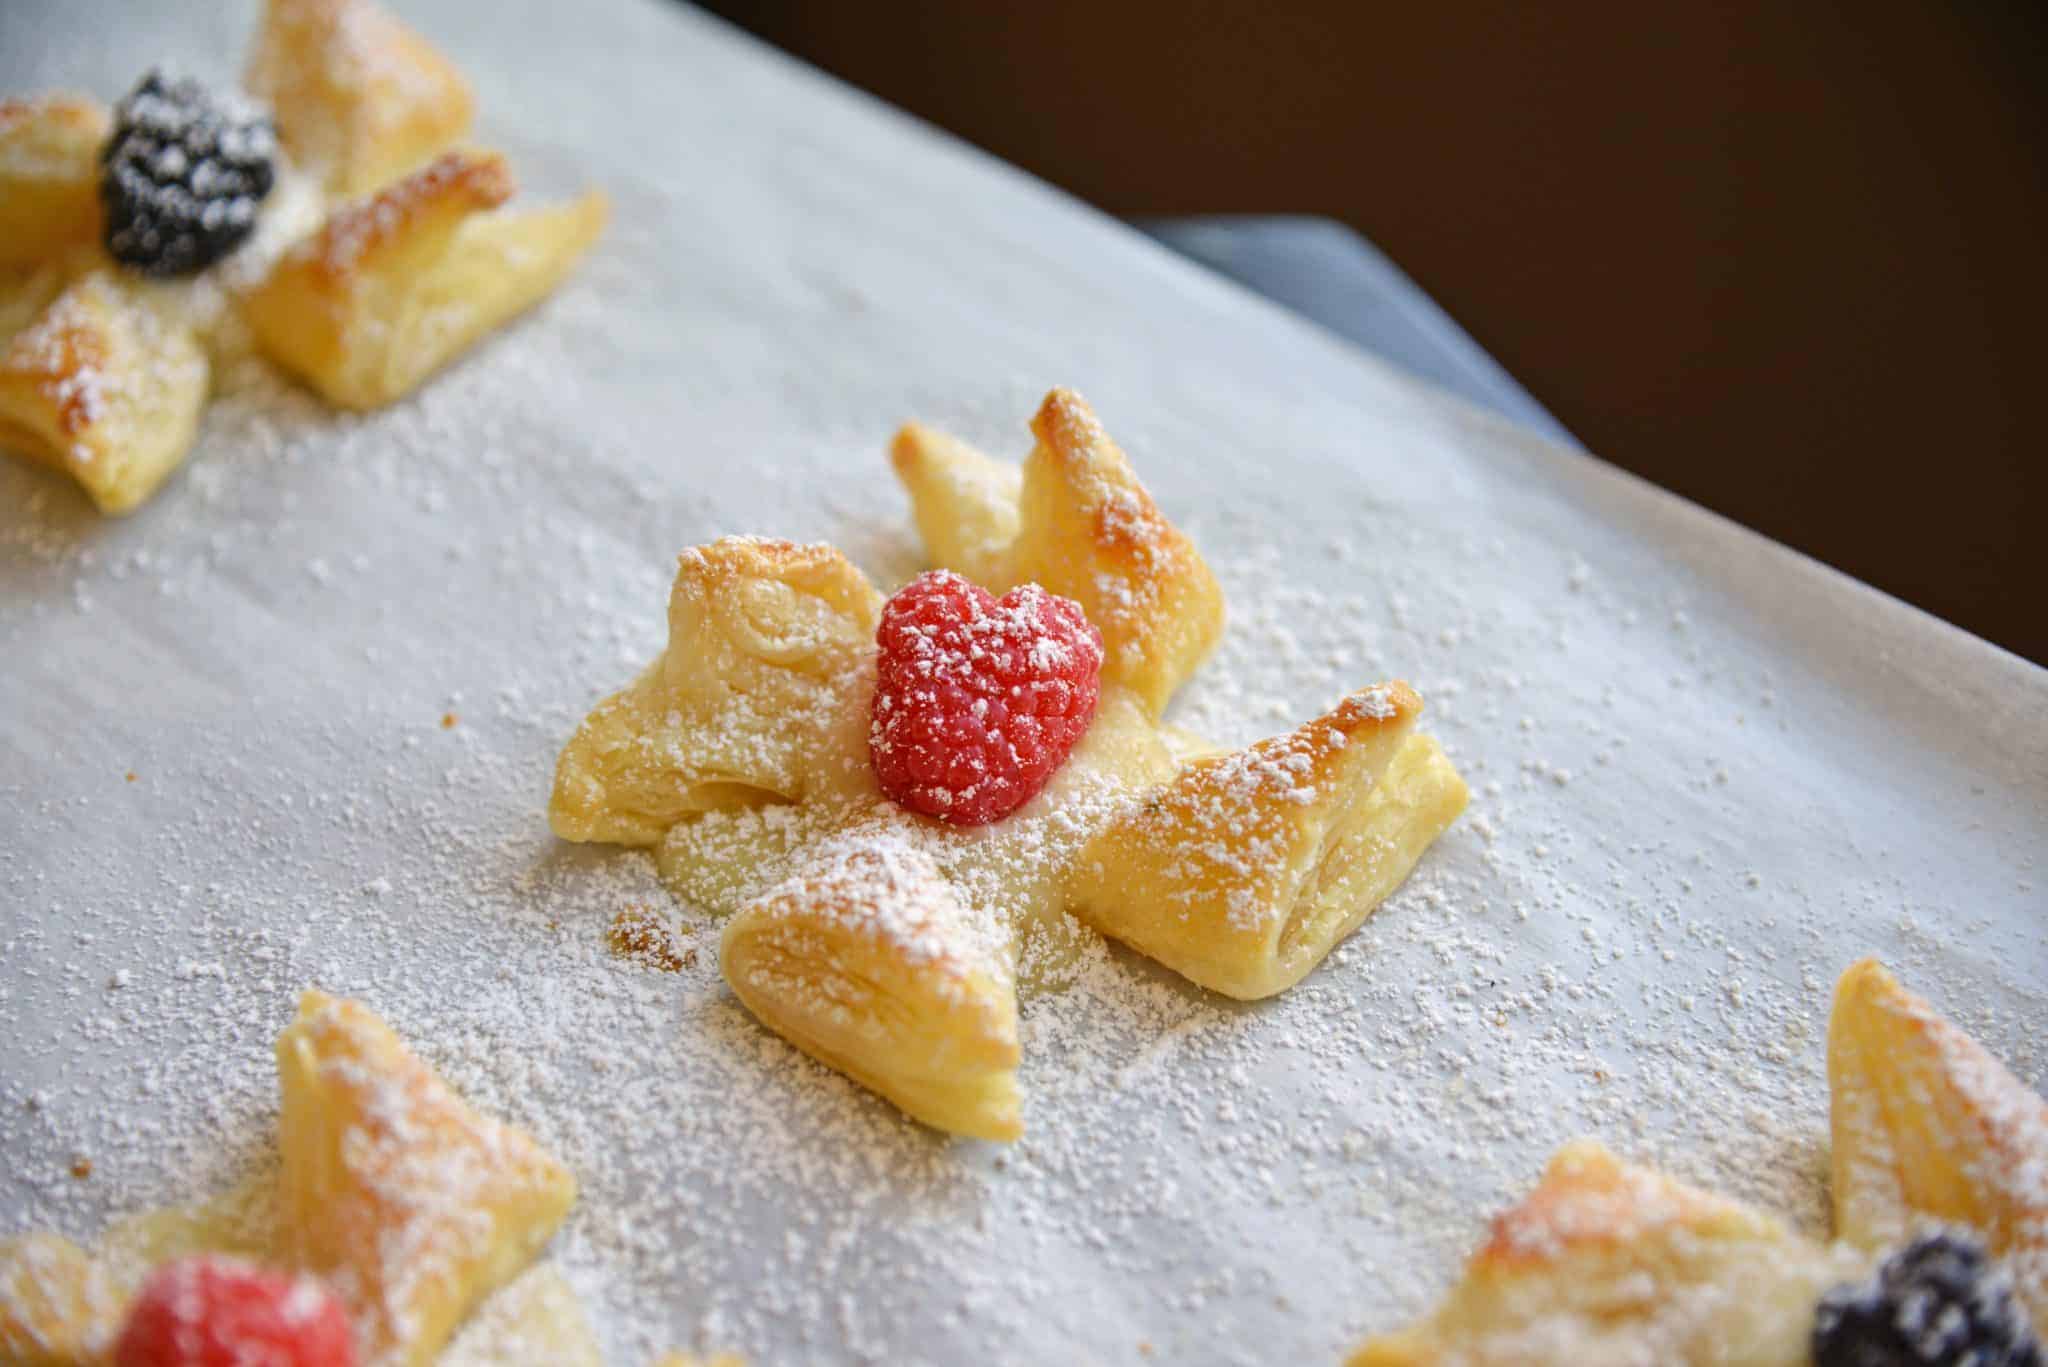 Danish Pastry make a great dessert that is not heavy but is also easy and quick to put together. Everyone will love this brie in puff pastry! #puffpastrydesserts #brieinpuffpastry www.savoryexperiments.com